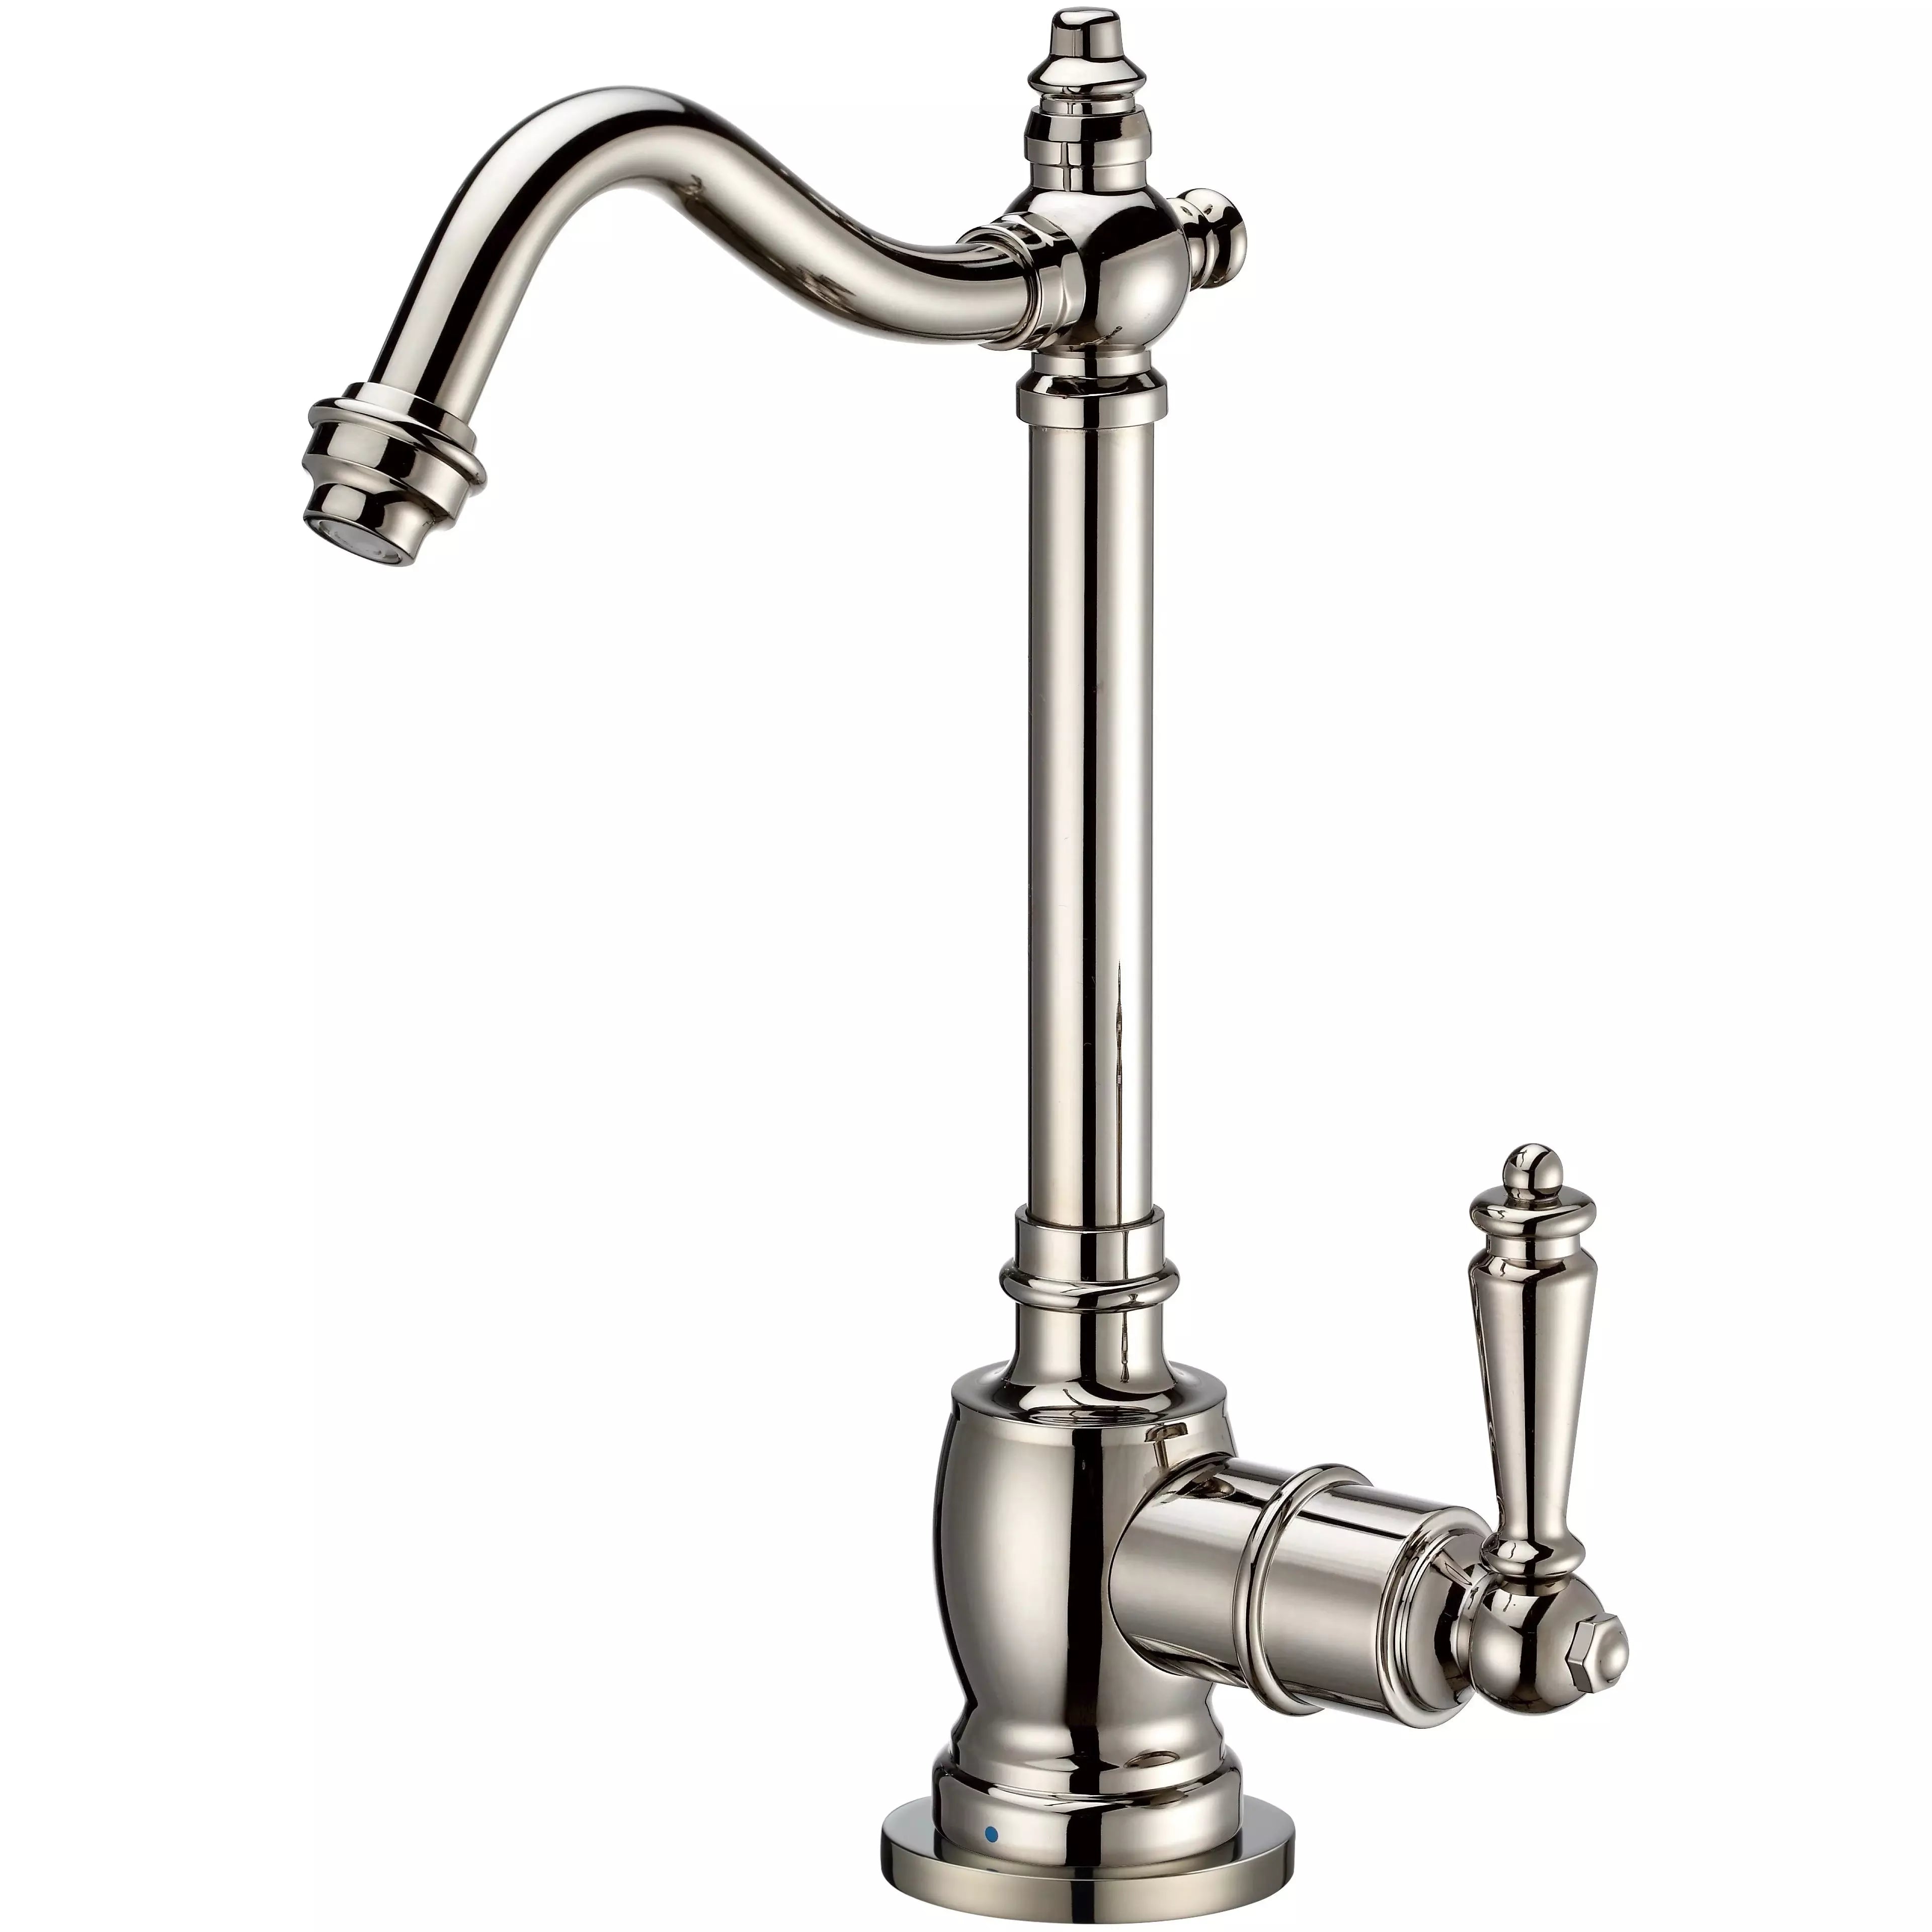 WHITEHAUS Point of Use Cold Water Drinking Faucet with Traditional Swivel Spout - WHFH-C1006